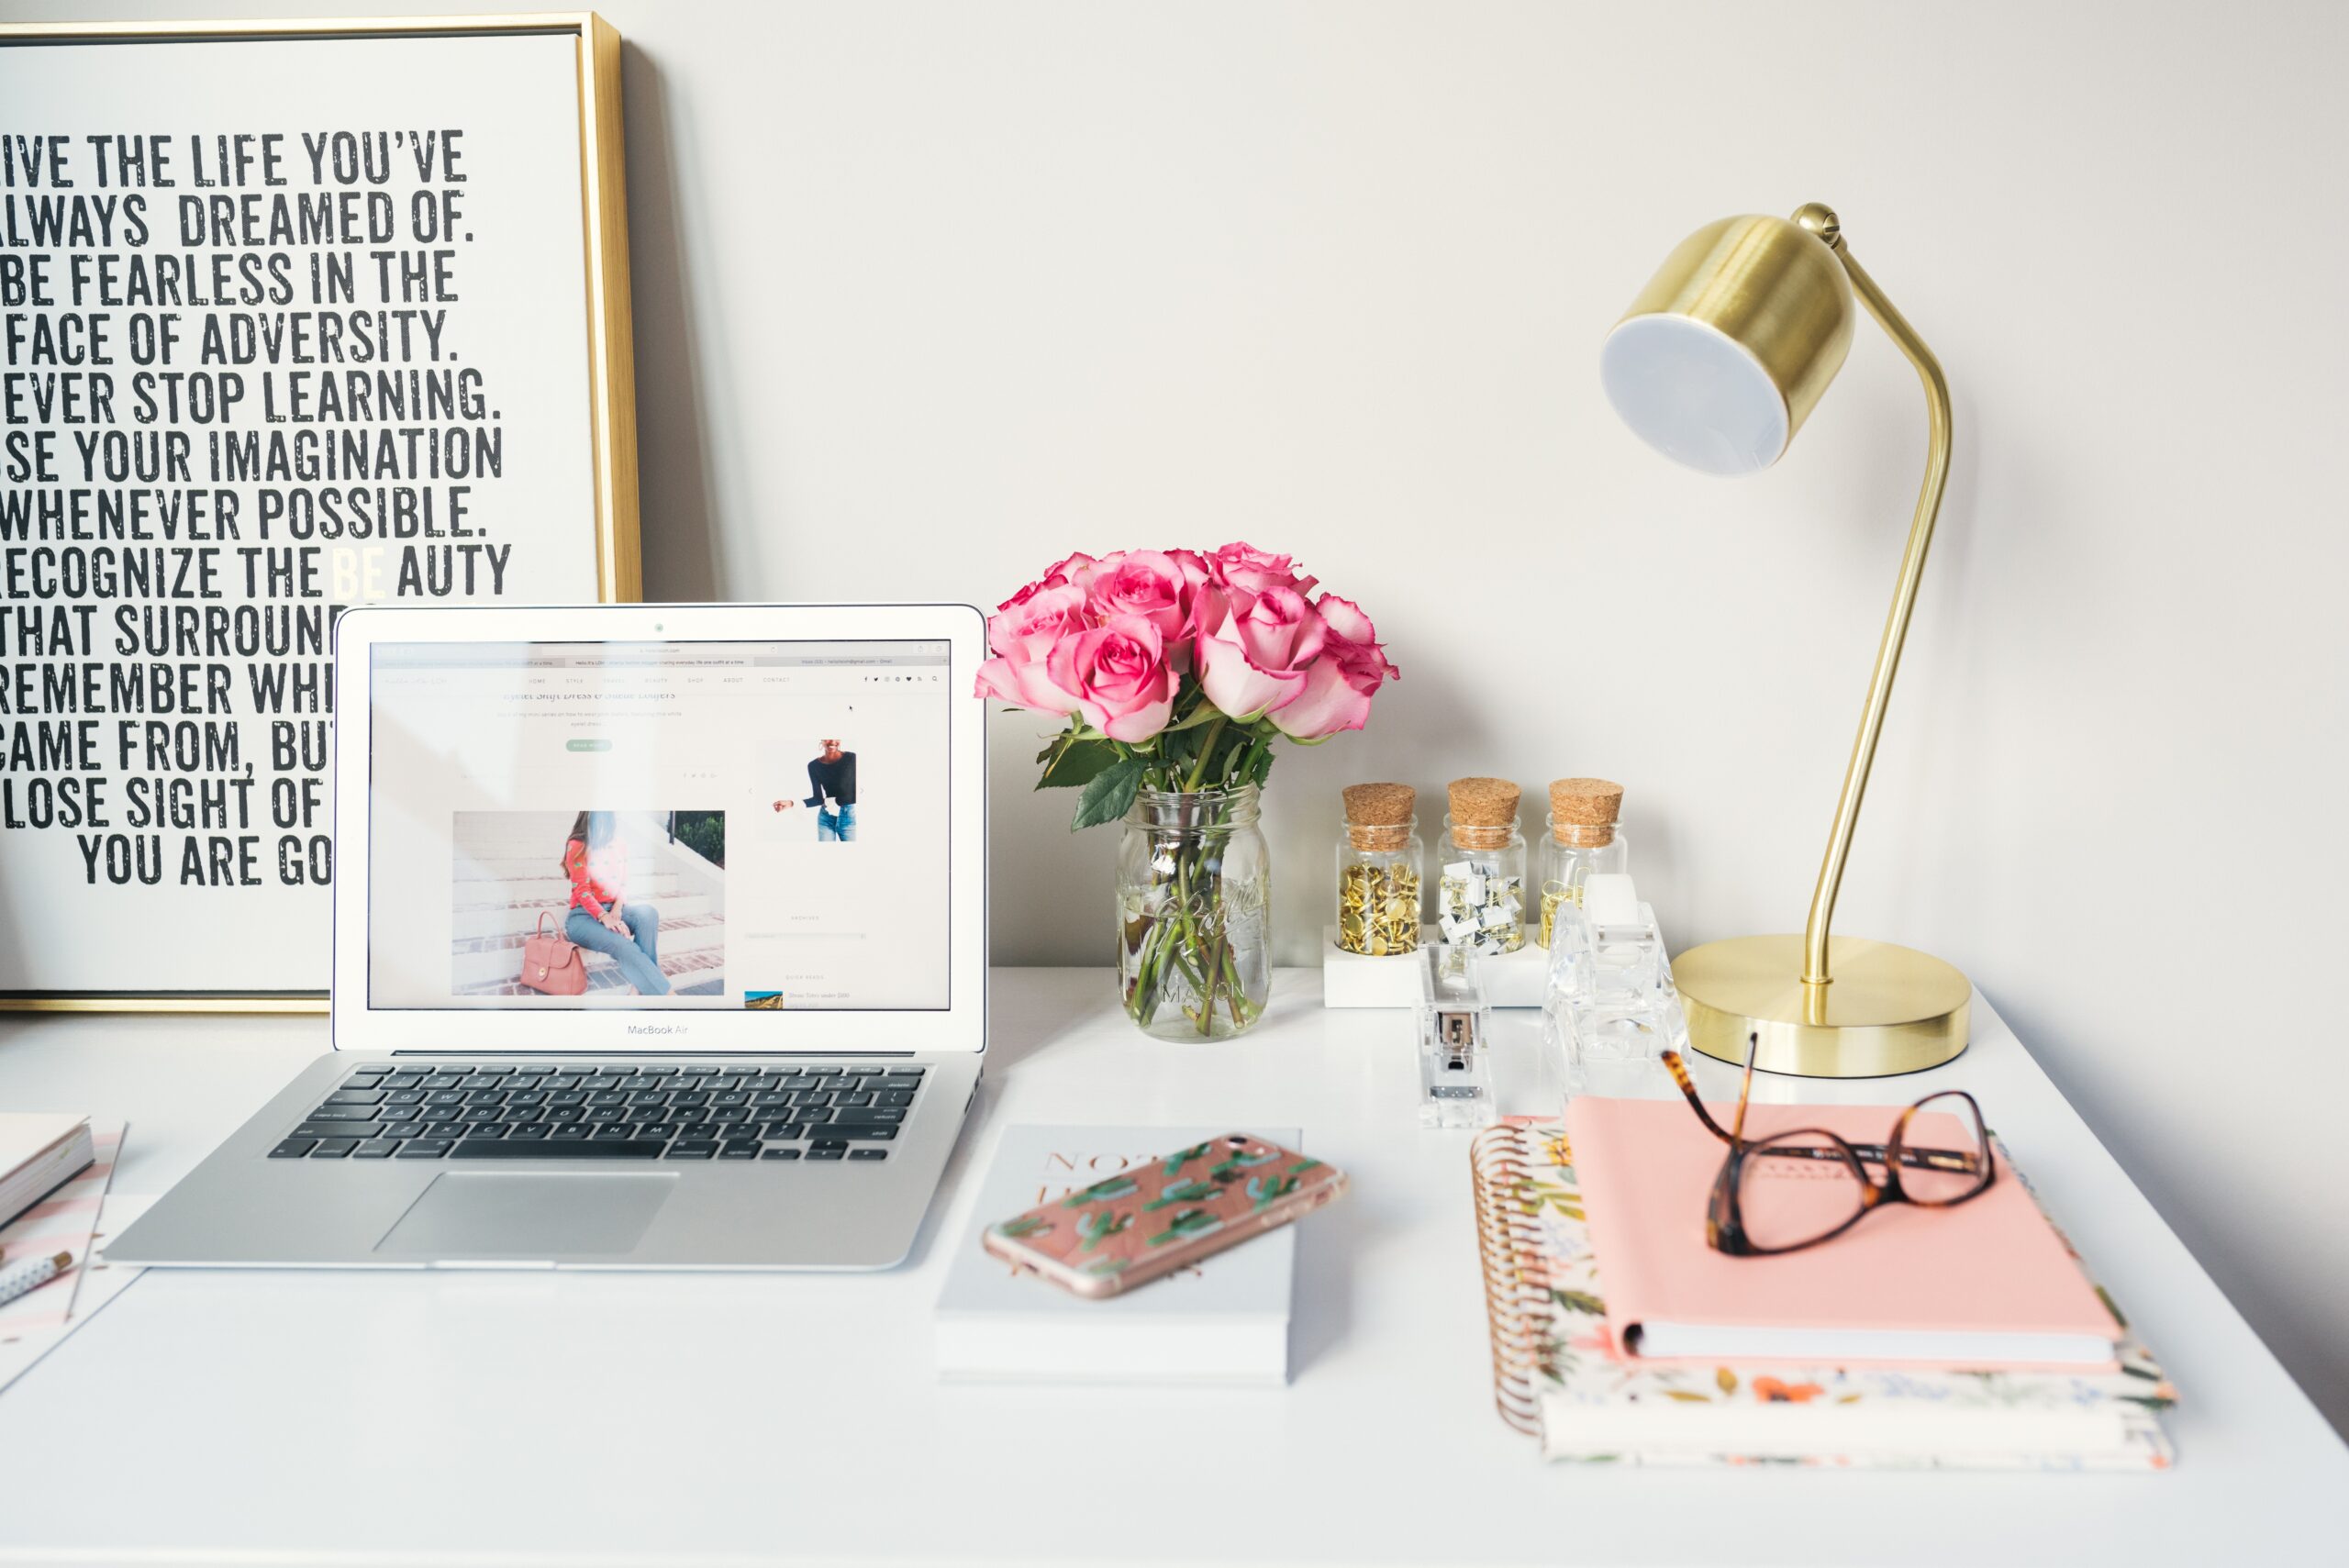 A copywriter's desk covered in delicate details like a brass desk lamp, open laptop, pink flowers and notebooks, and a motivational text poster in the background.